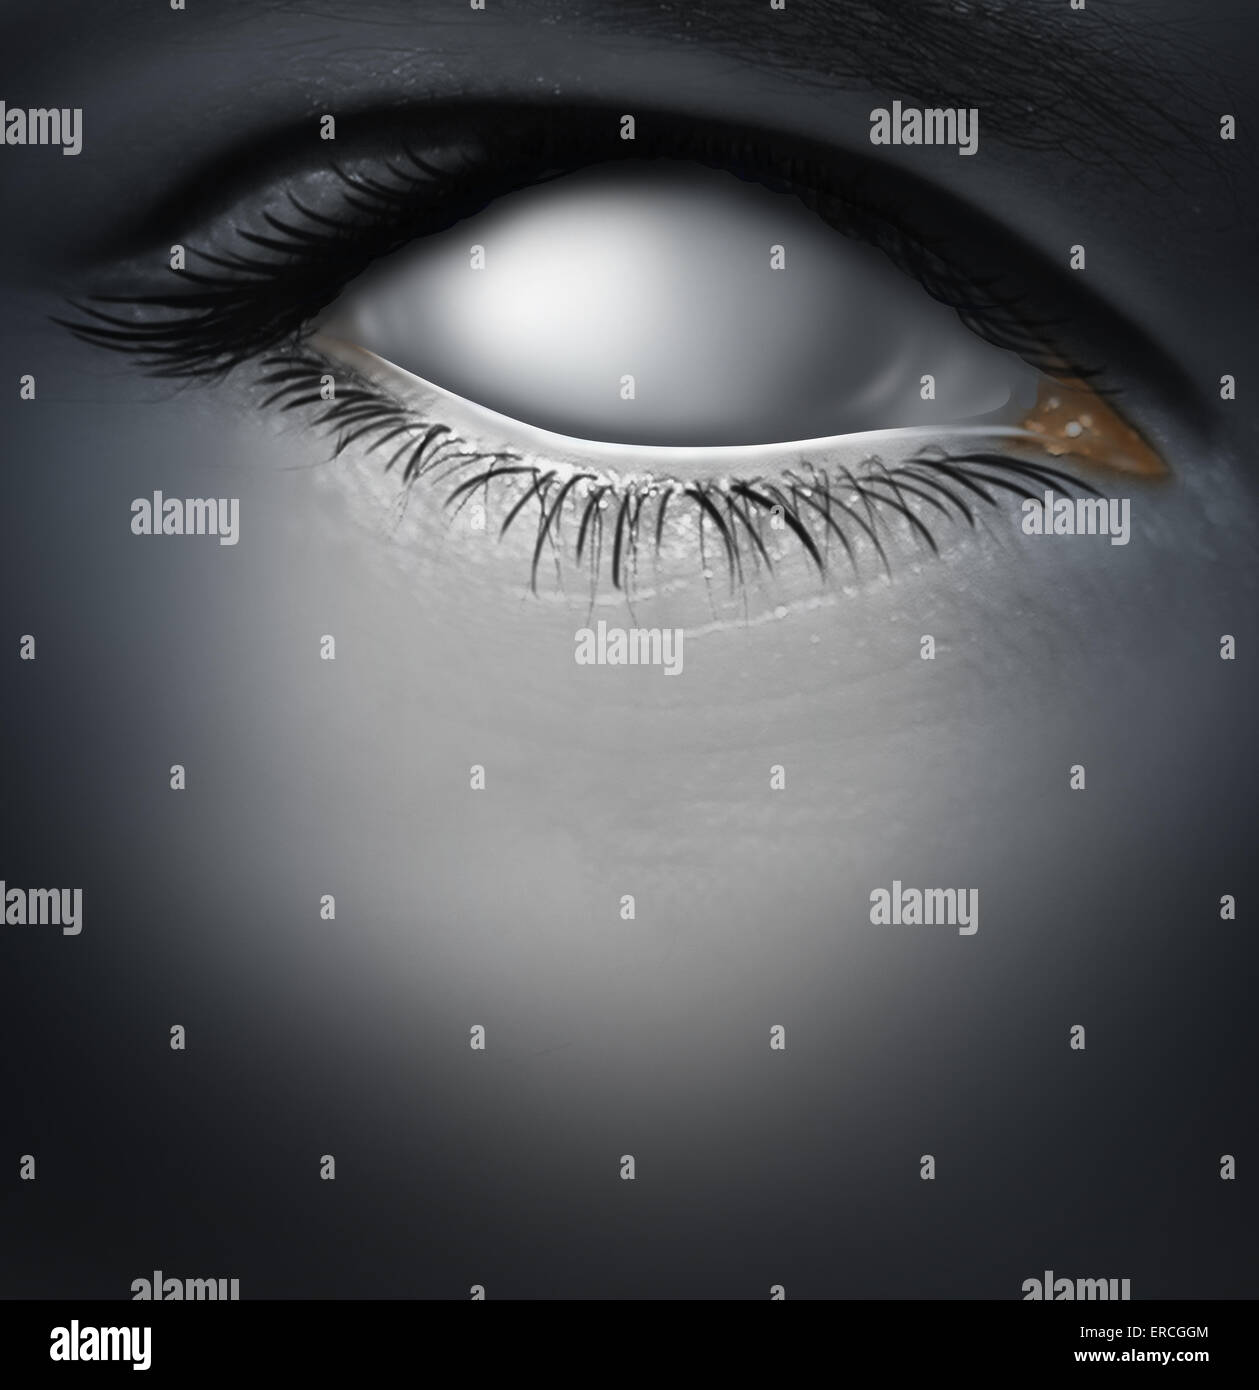 Lost concept and losing memory caused by dementia as alzheimers disease with a blind human eye as a blank white eyeball as a mental health symbol for a psychological crisis of personality and search for direction. Stock Photo